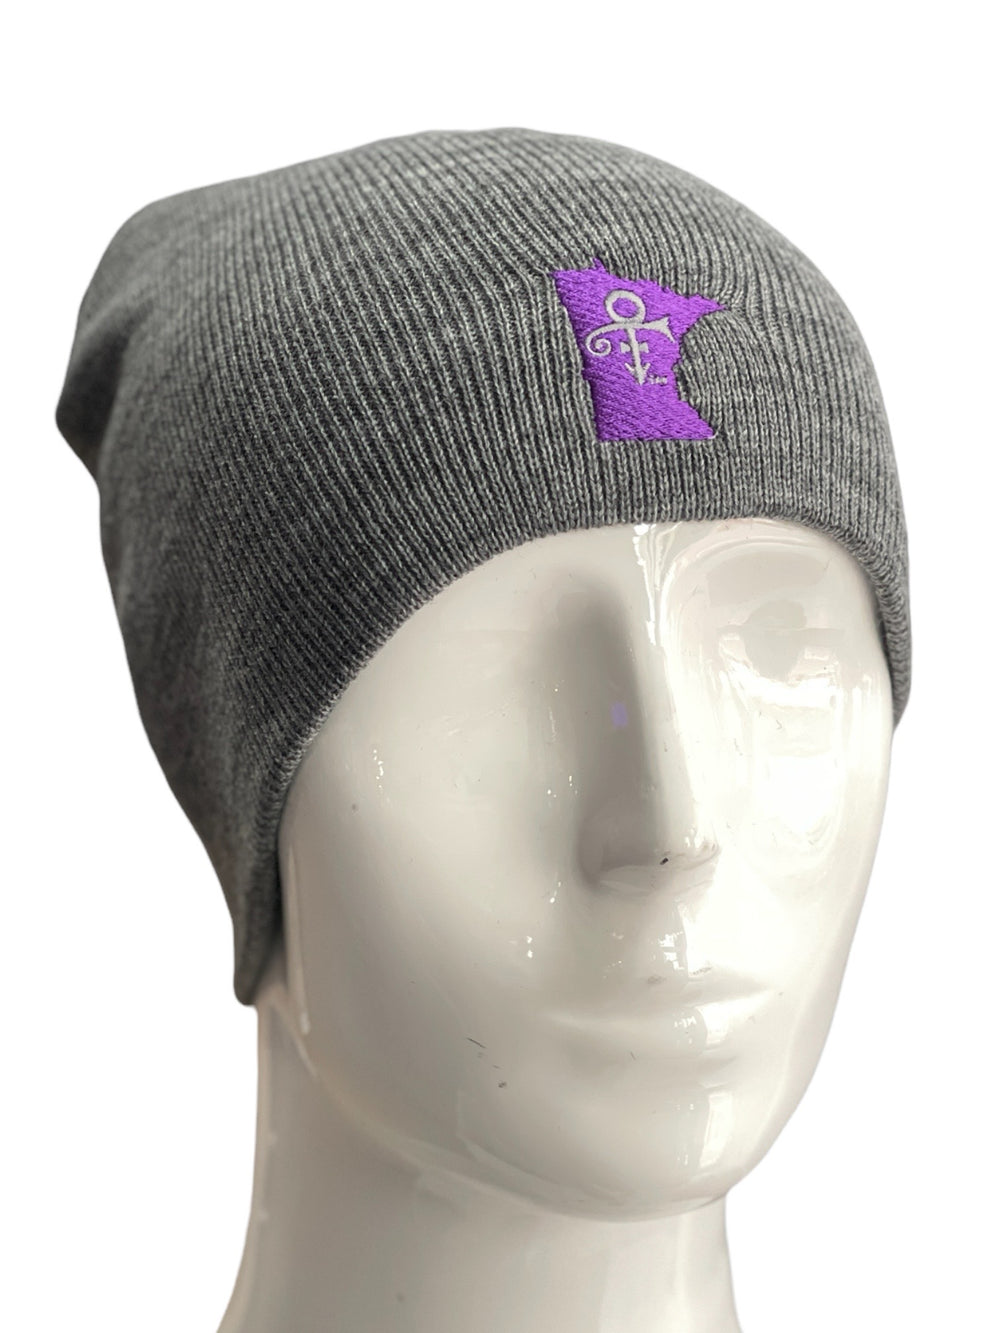 Prince – Love Symbol Minnesota Beanie Hat Purple Thread Embroidery Official & Xclusive